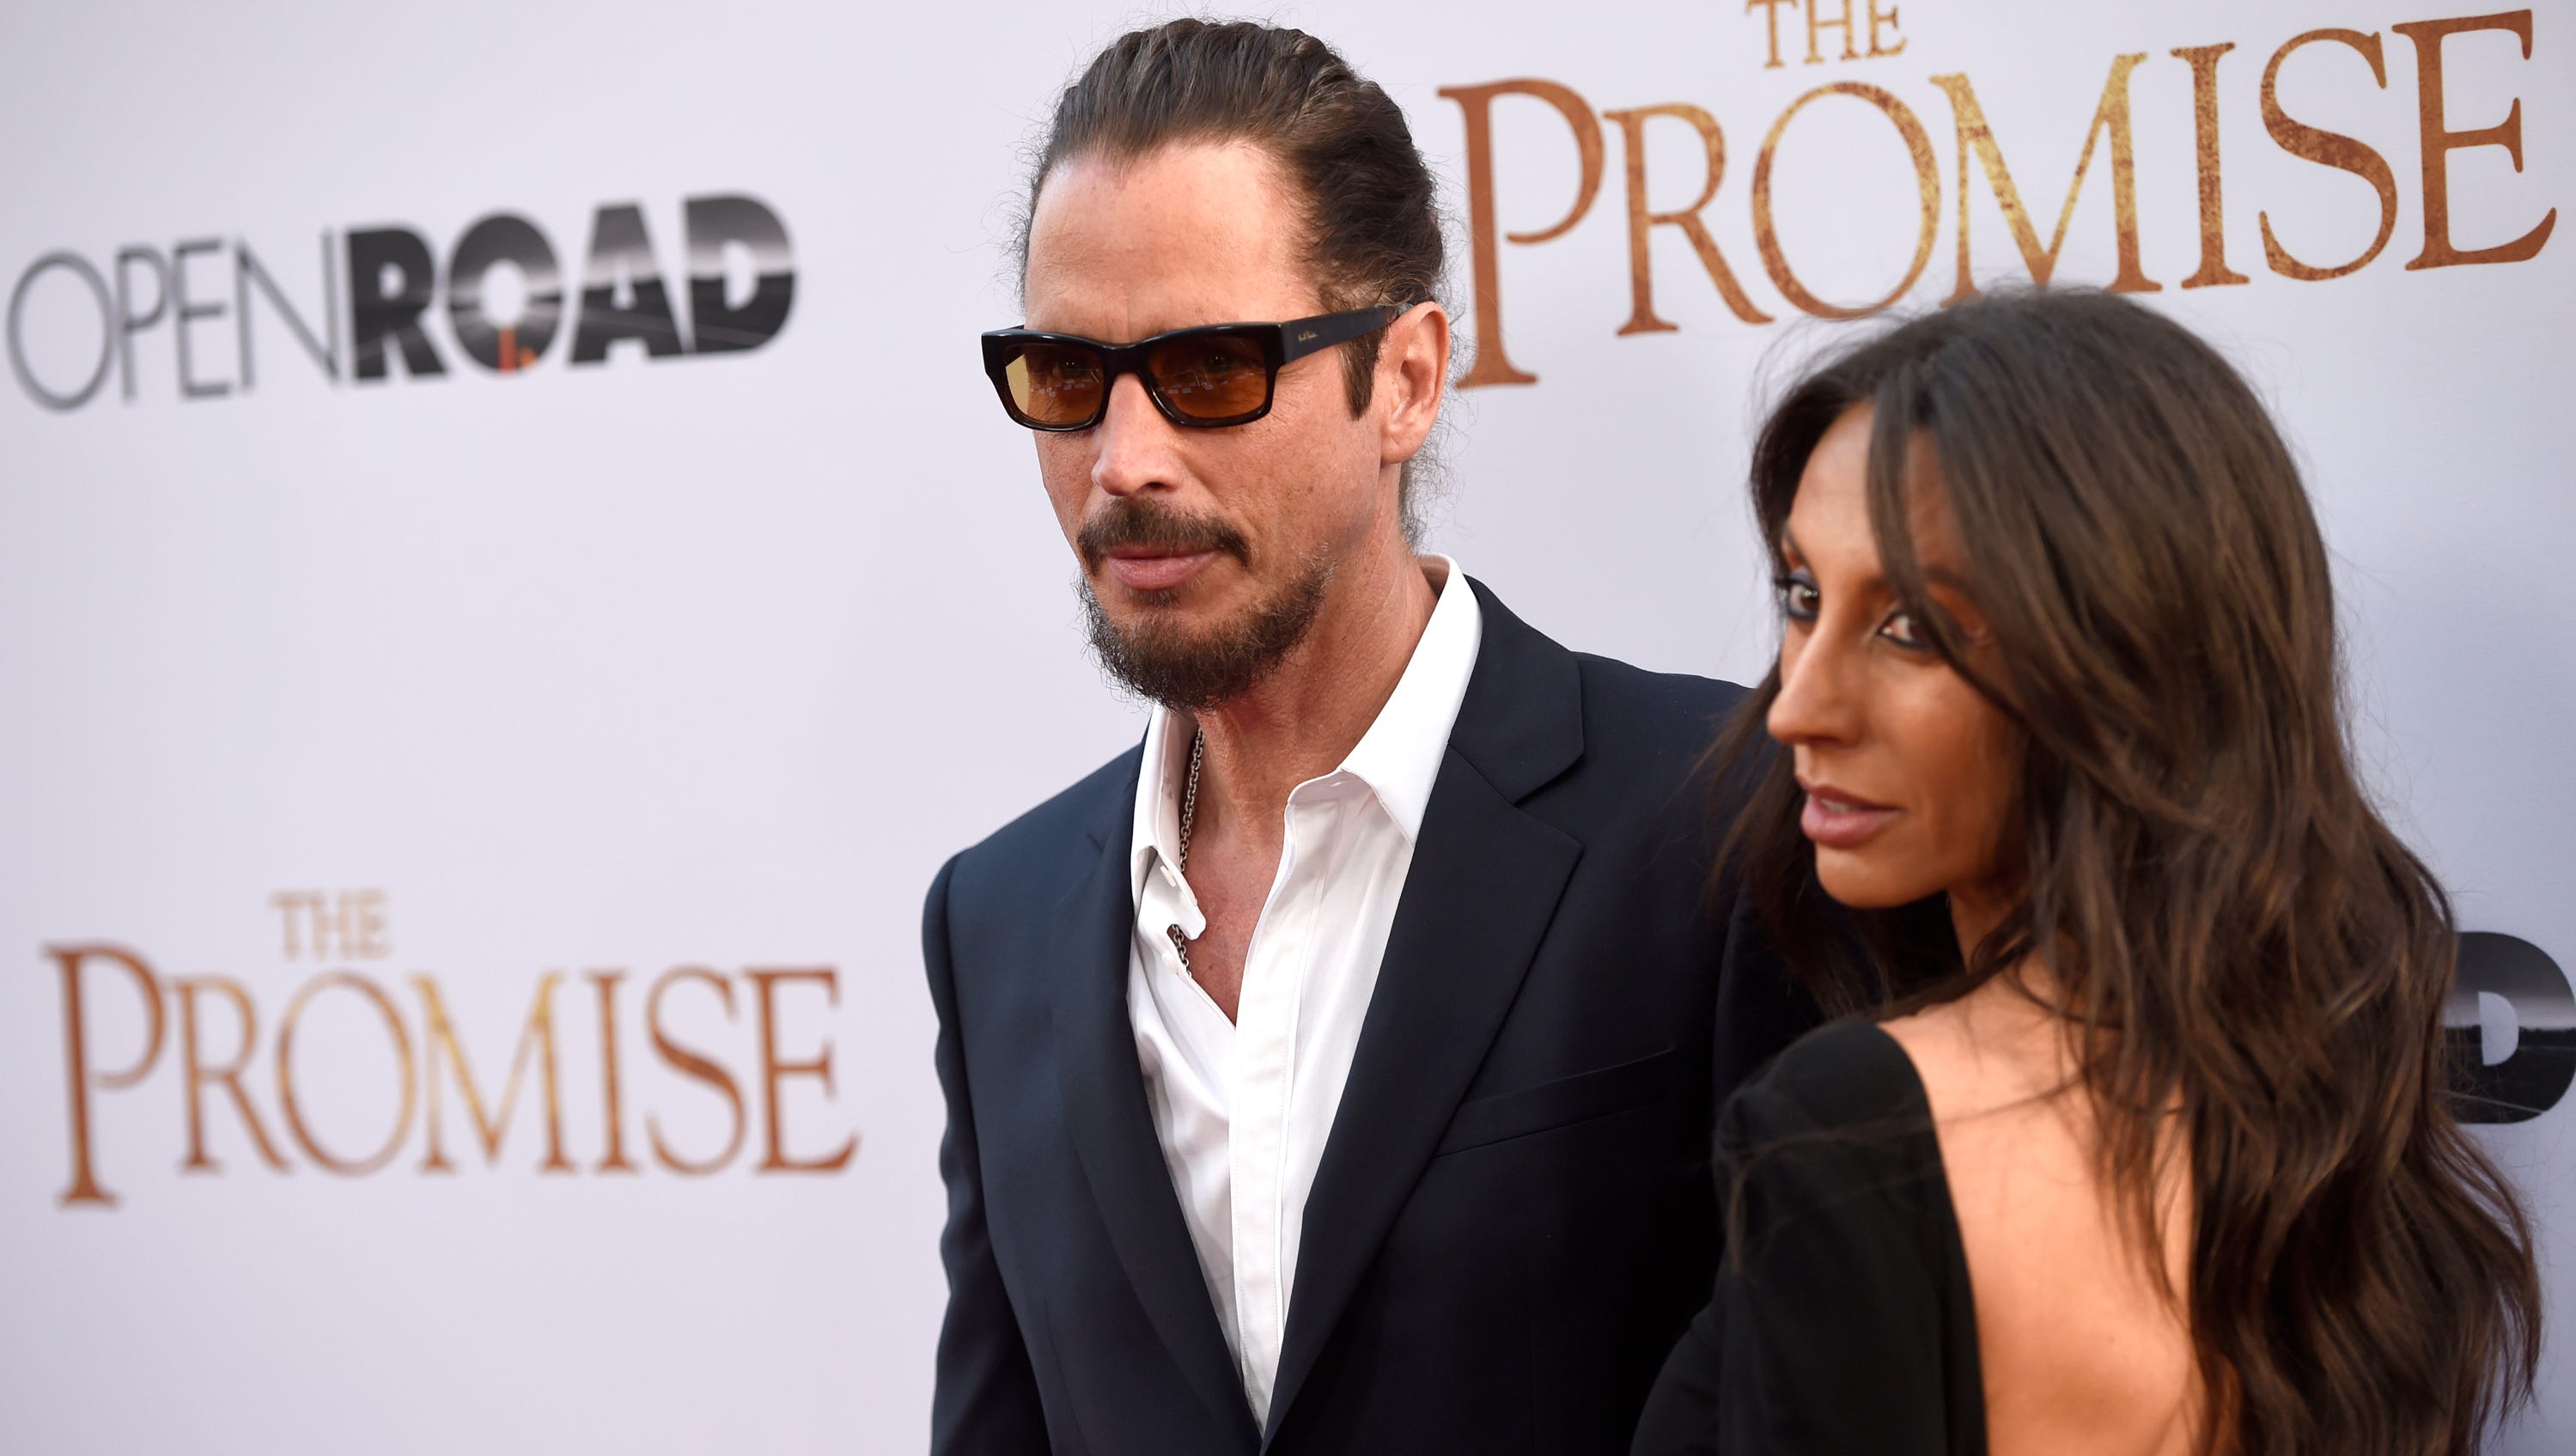 Chris Cornell and his wife Vicky Karayiannis arrive at the U.S. premiere of "The Promise" at the TCL Chinese Theatre in Los Angeles, April 12, 2017.